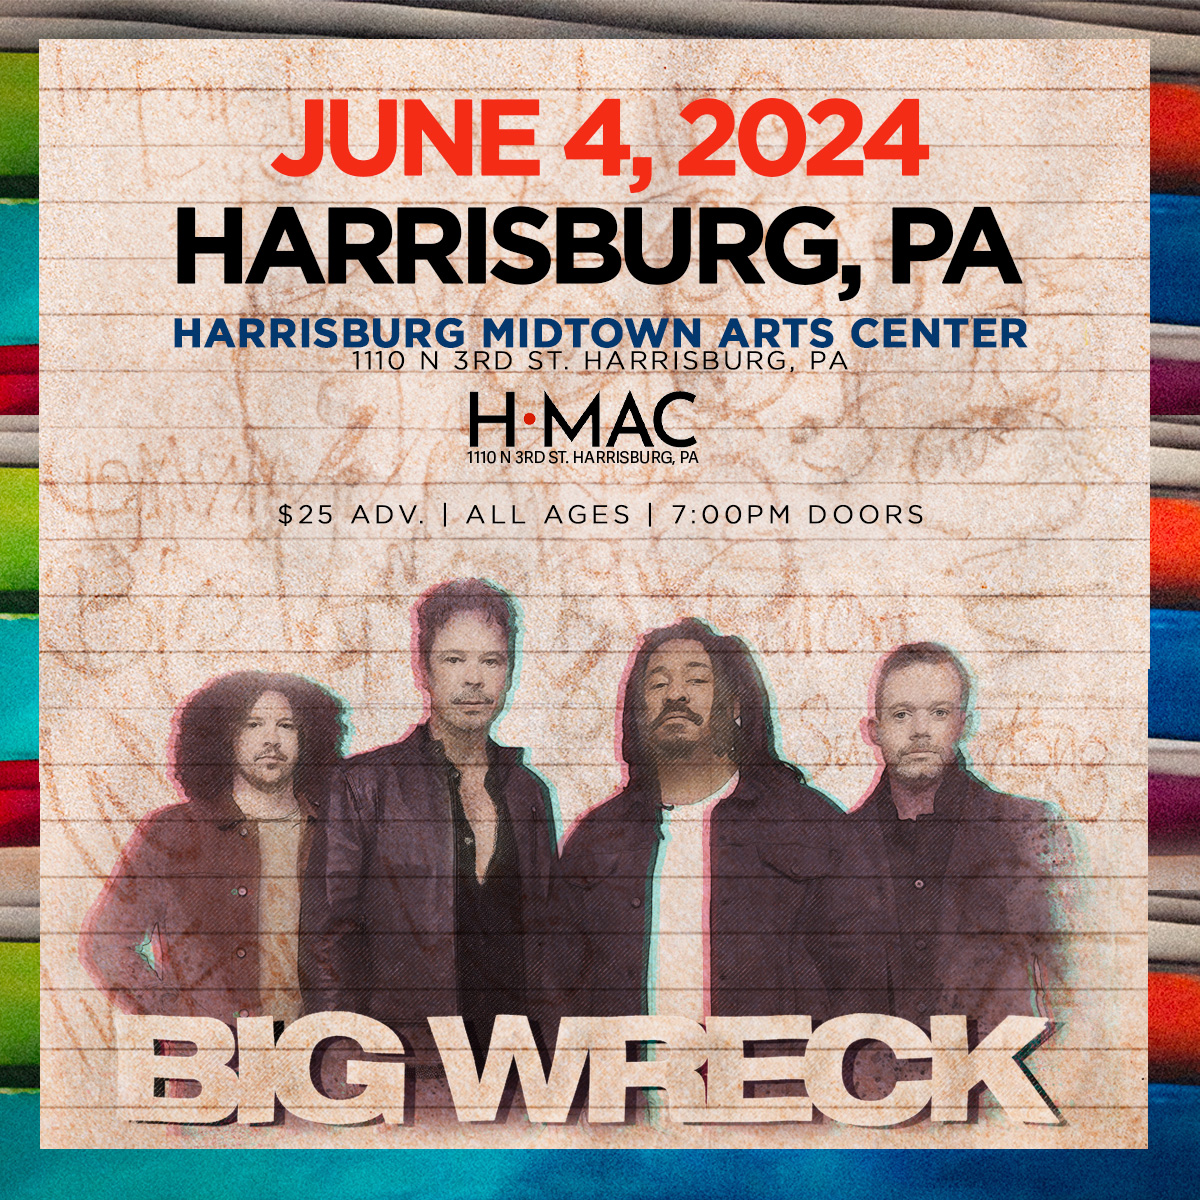 June 4 Live in Harrisburg the Harrisburg Midtown Arts Center! Let's go! Tickets on sale Now ticketmaster.com/event/02006050…